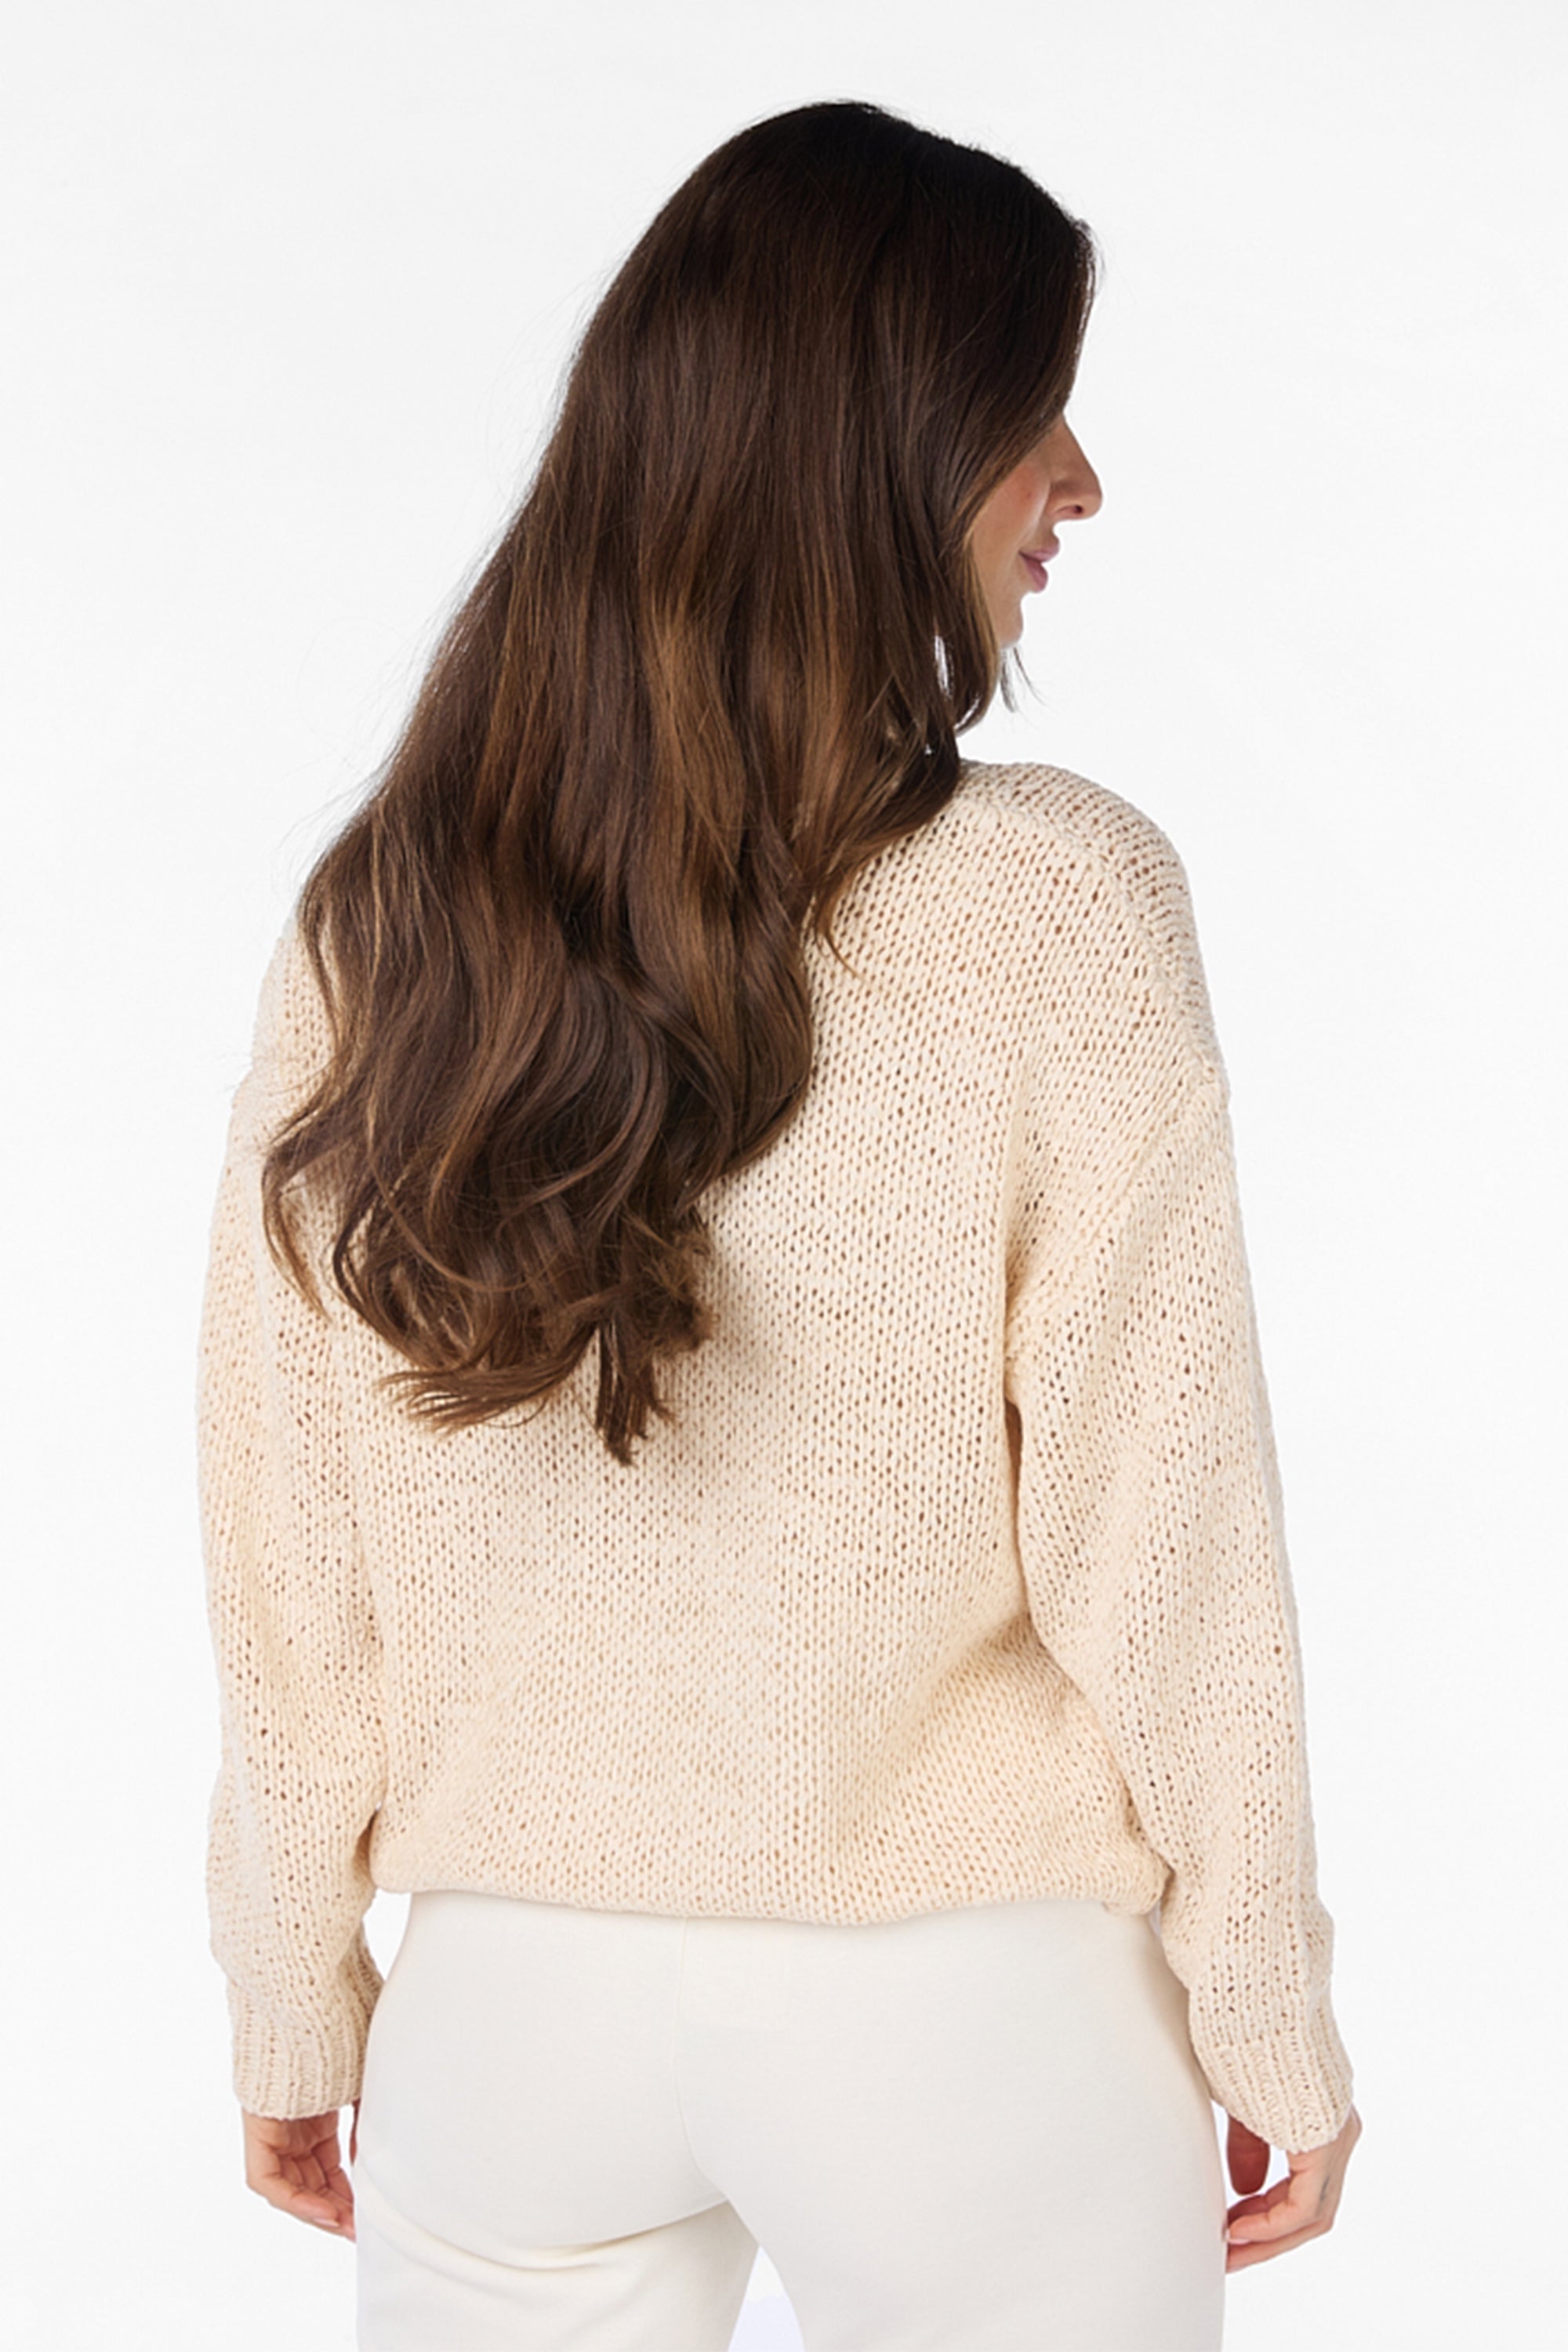 Back view of Esqualo (SP2418101) Women's Long Sleeve Loose Knit Tape Yarn Sweater With Drop Shoulders and Relaxed fit in Sand Beige